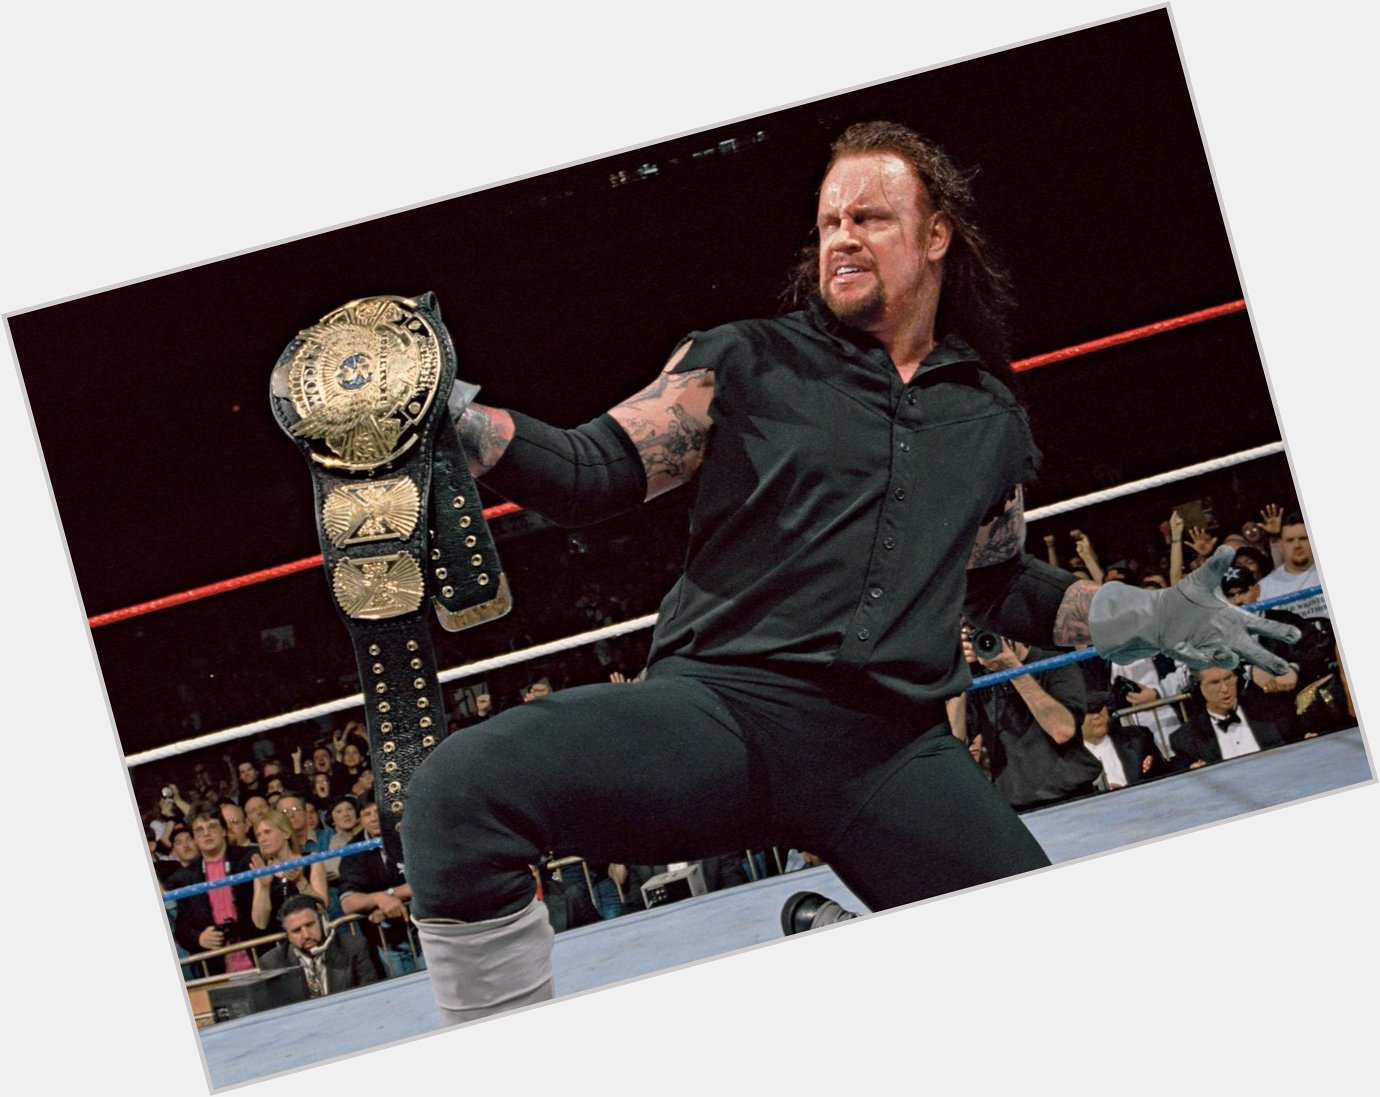 Happy 53rd Birthday to the most iconic professional wrestler in history, The Undertaker! 